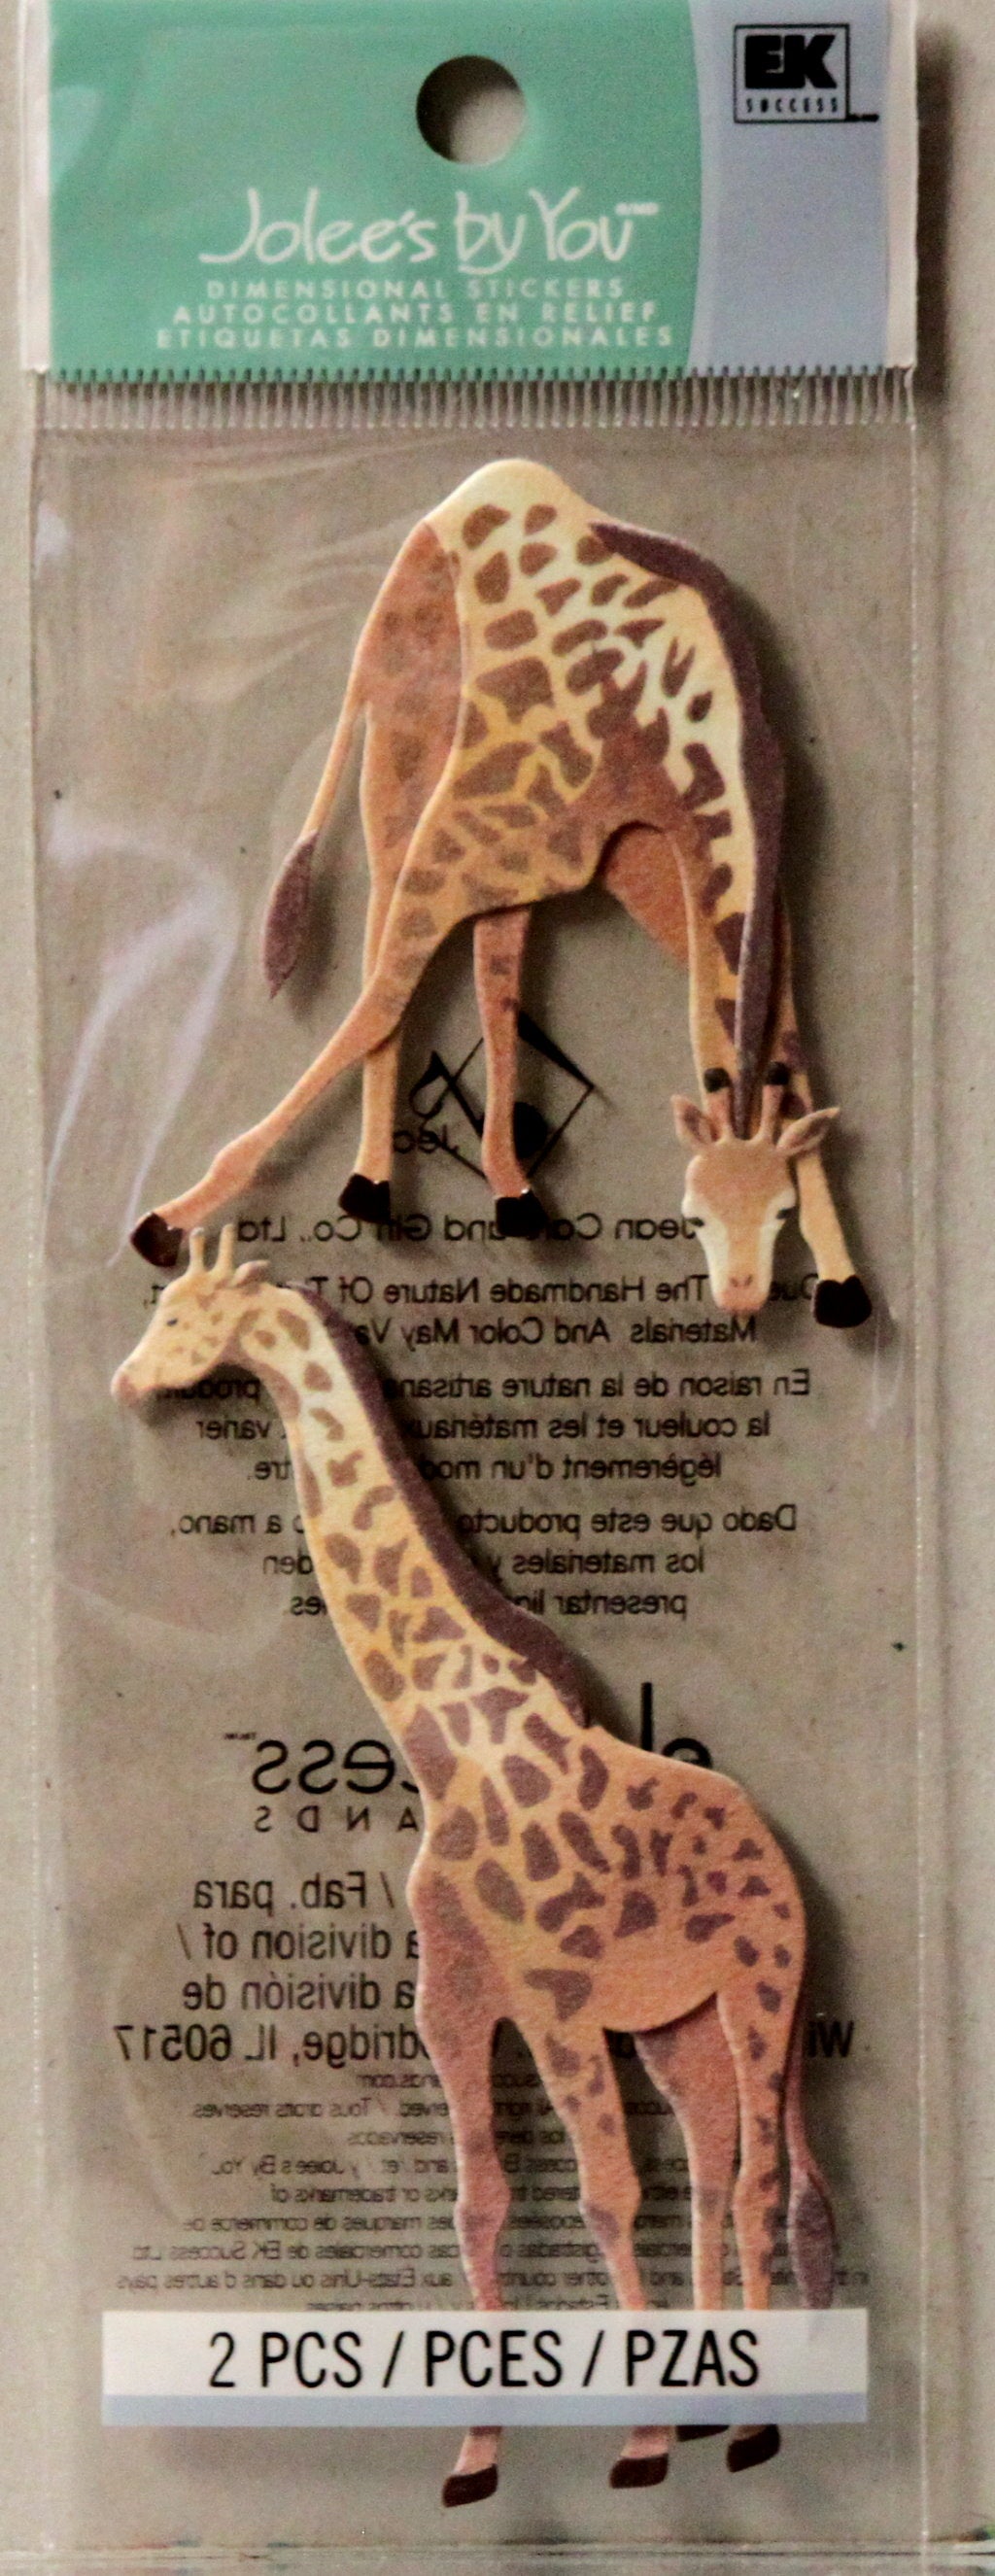 Jolee's Boutique Jolee's By You Giraffe Dimensional Stickers